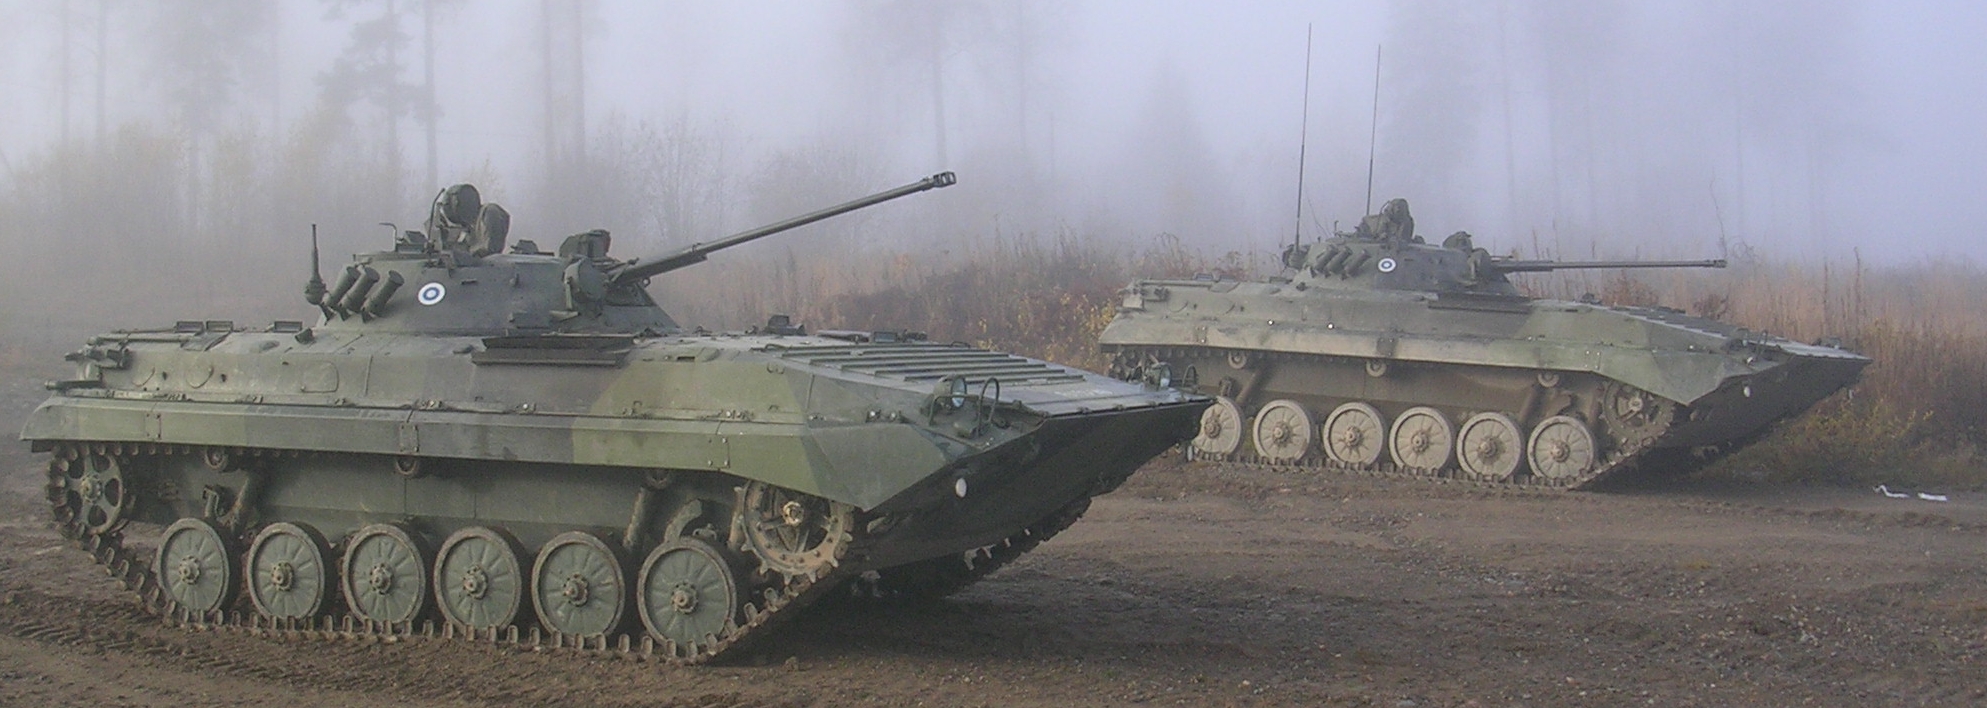 Two_Fninish_BMP-2s.JPG